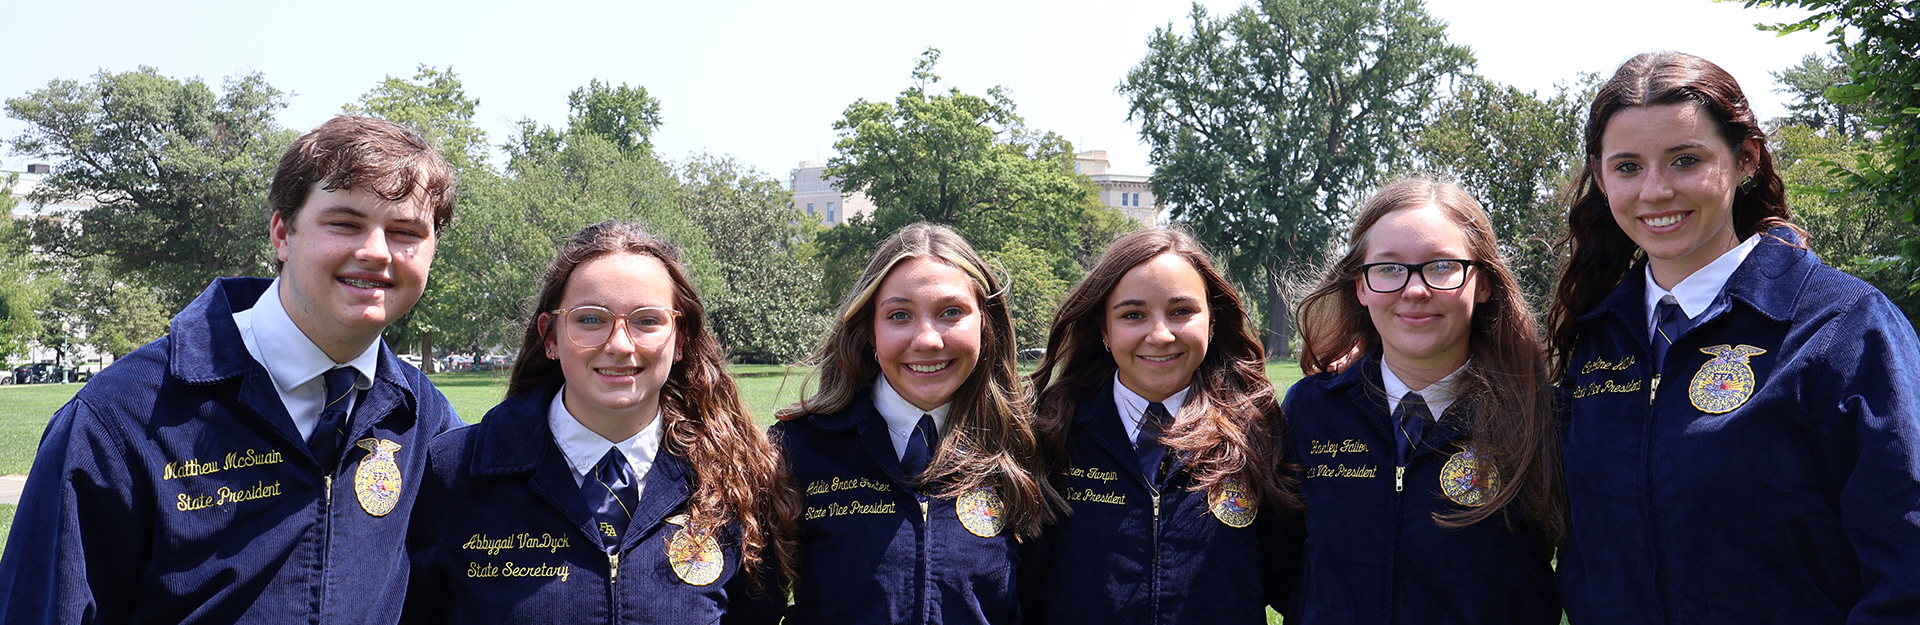 group photo of ffa officers 